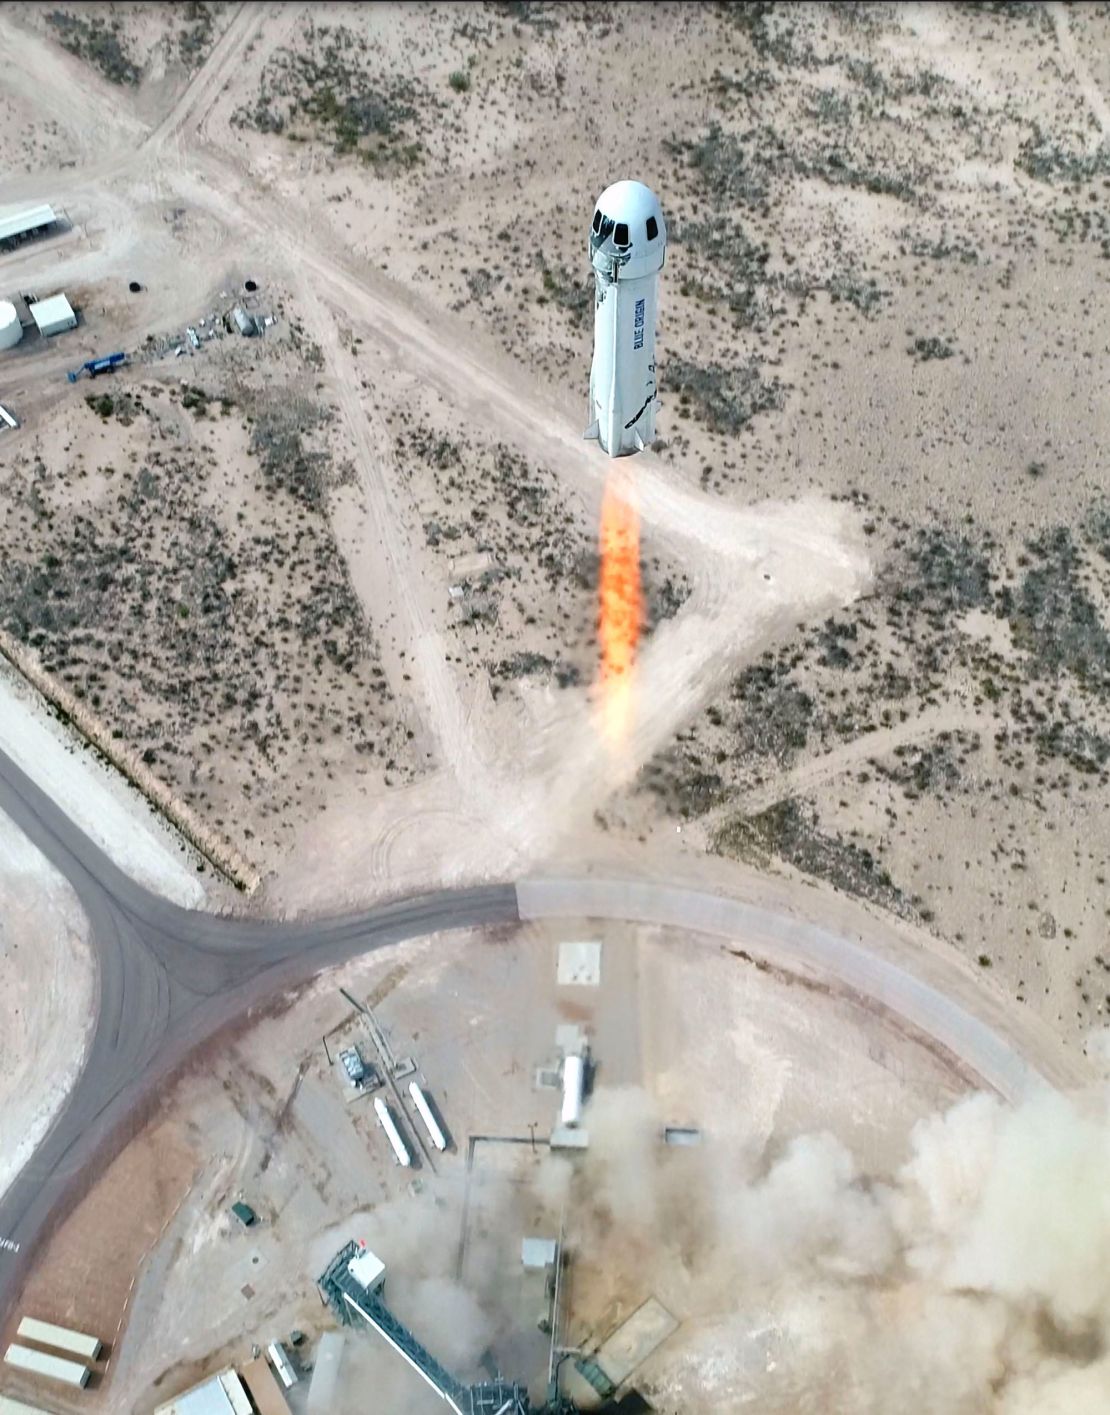 Mission NS-15 lifting off from Launch Site One in West Texas on April 14, 2021.